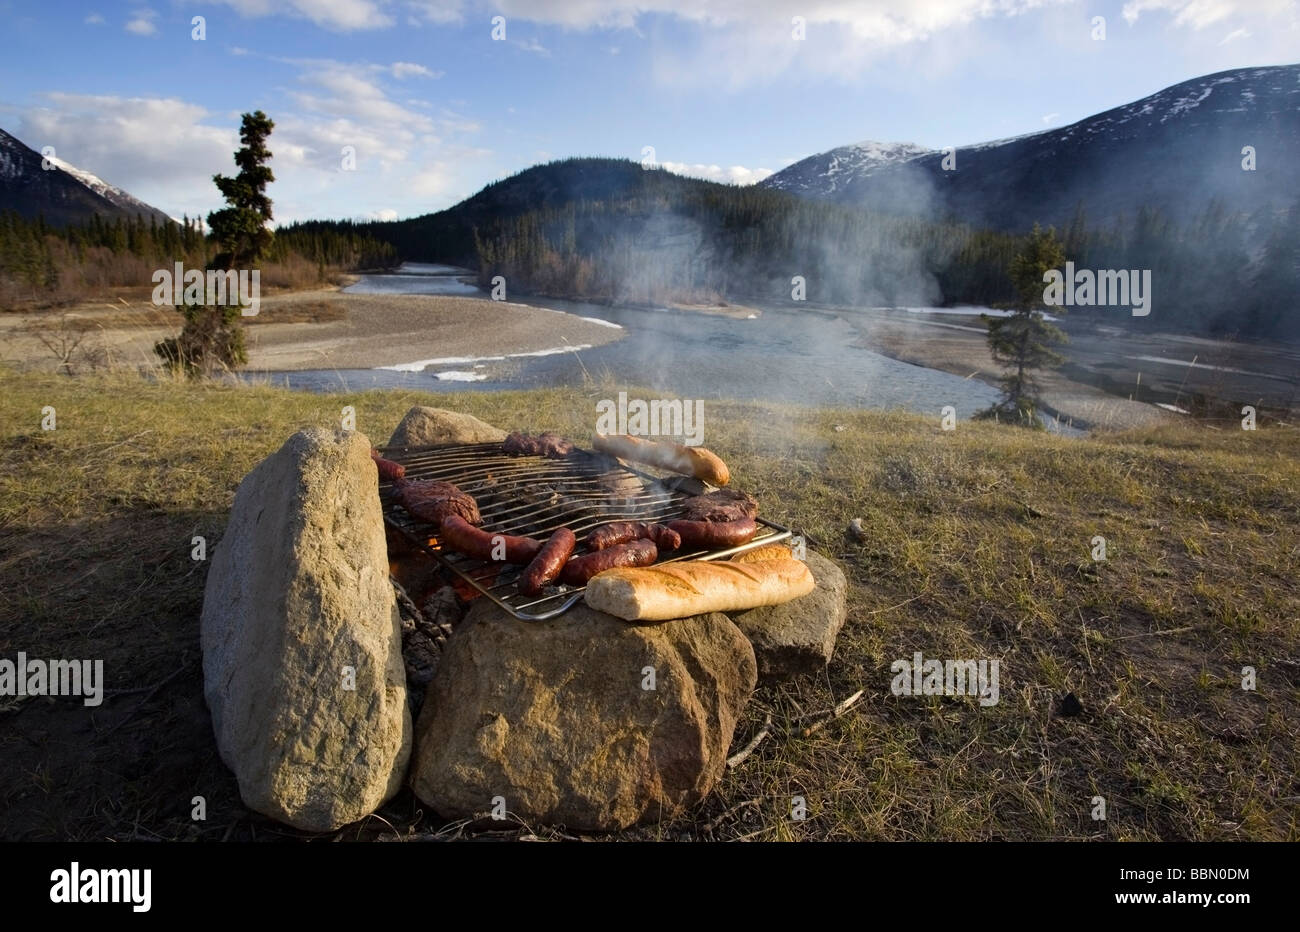 Sausages, steak and baguette, on a camp fire, barbecue, cooking, camping, Takhini River behind, Yukon Territory, Canada, North Stock Photo